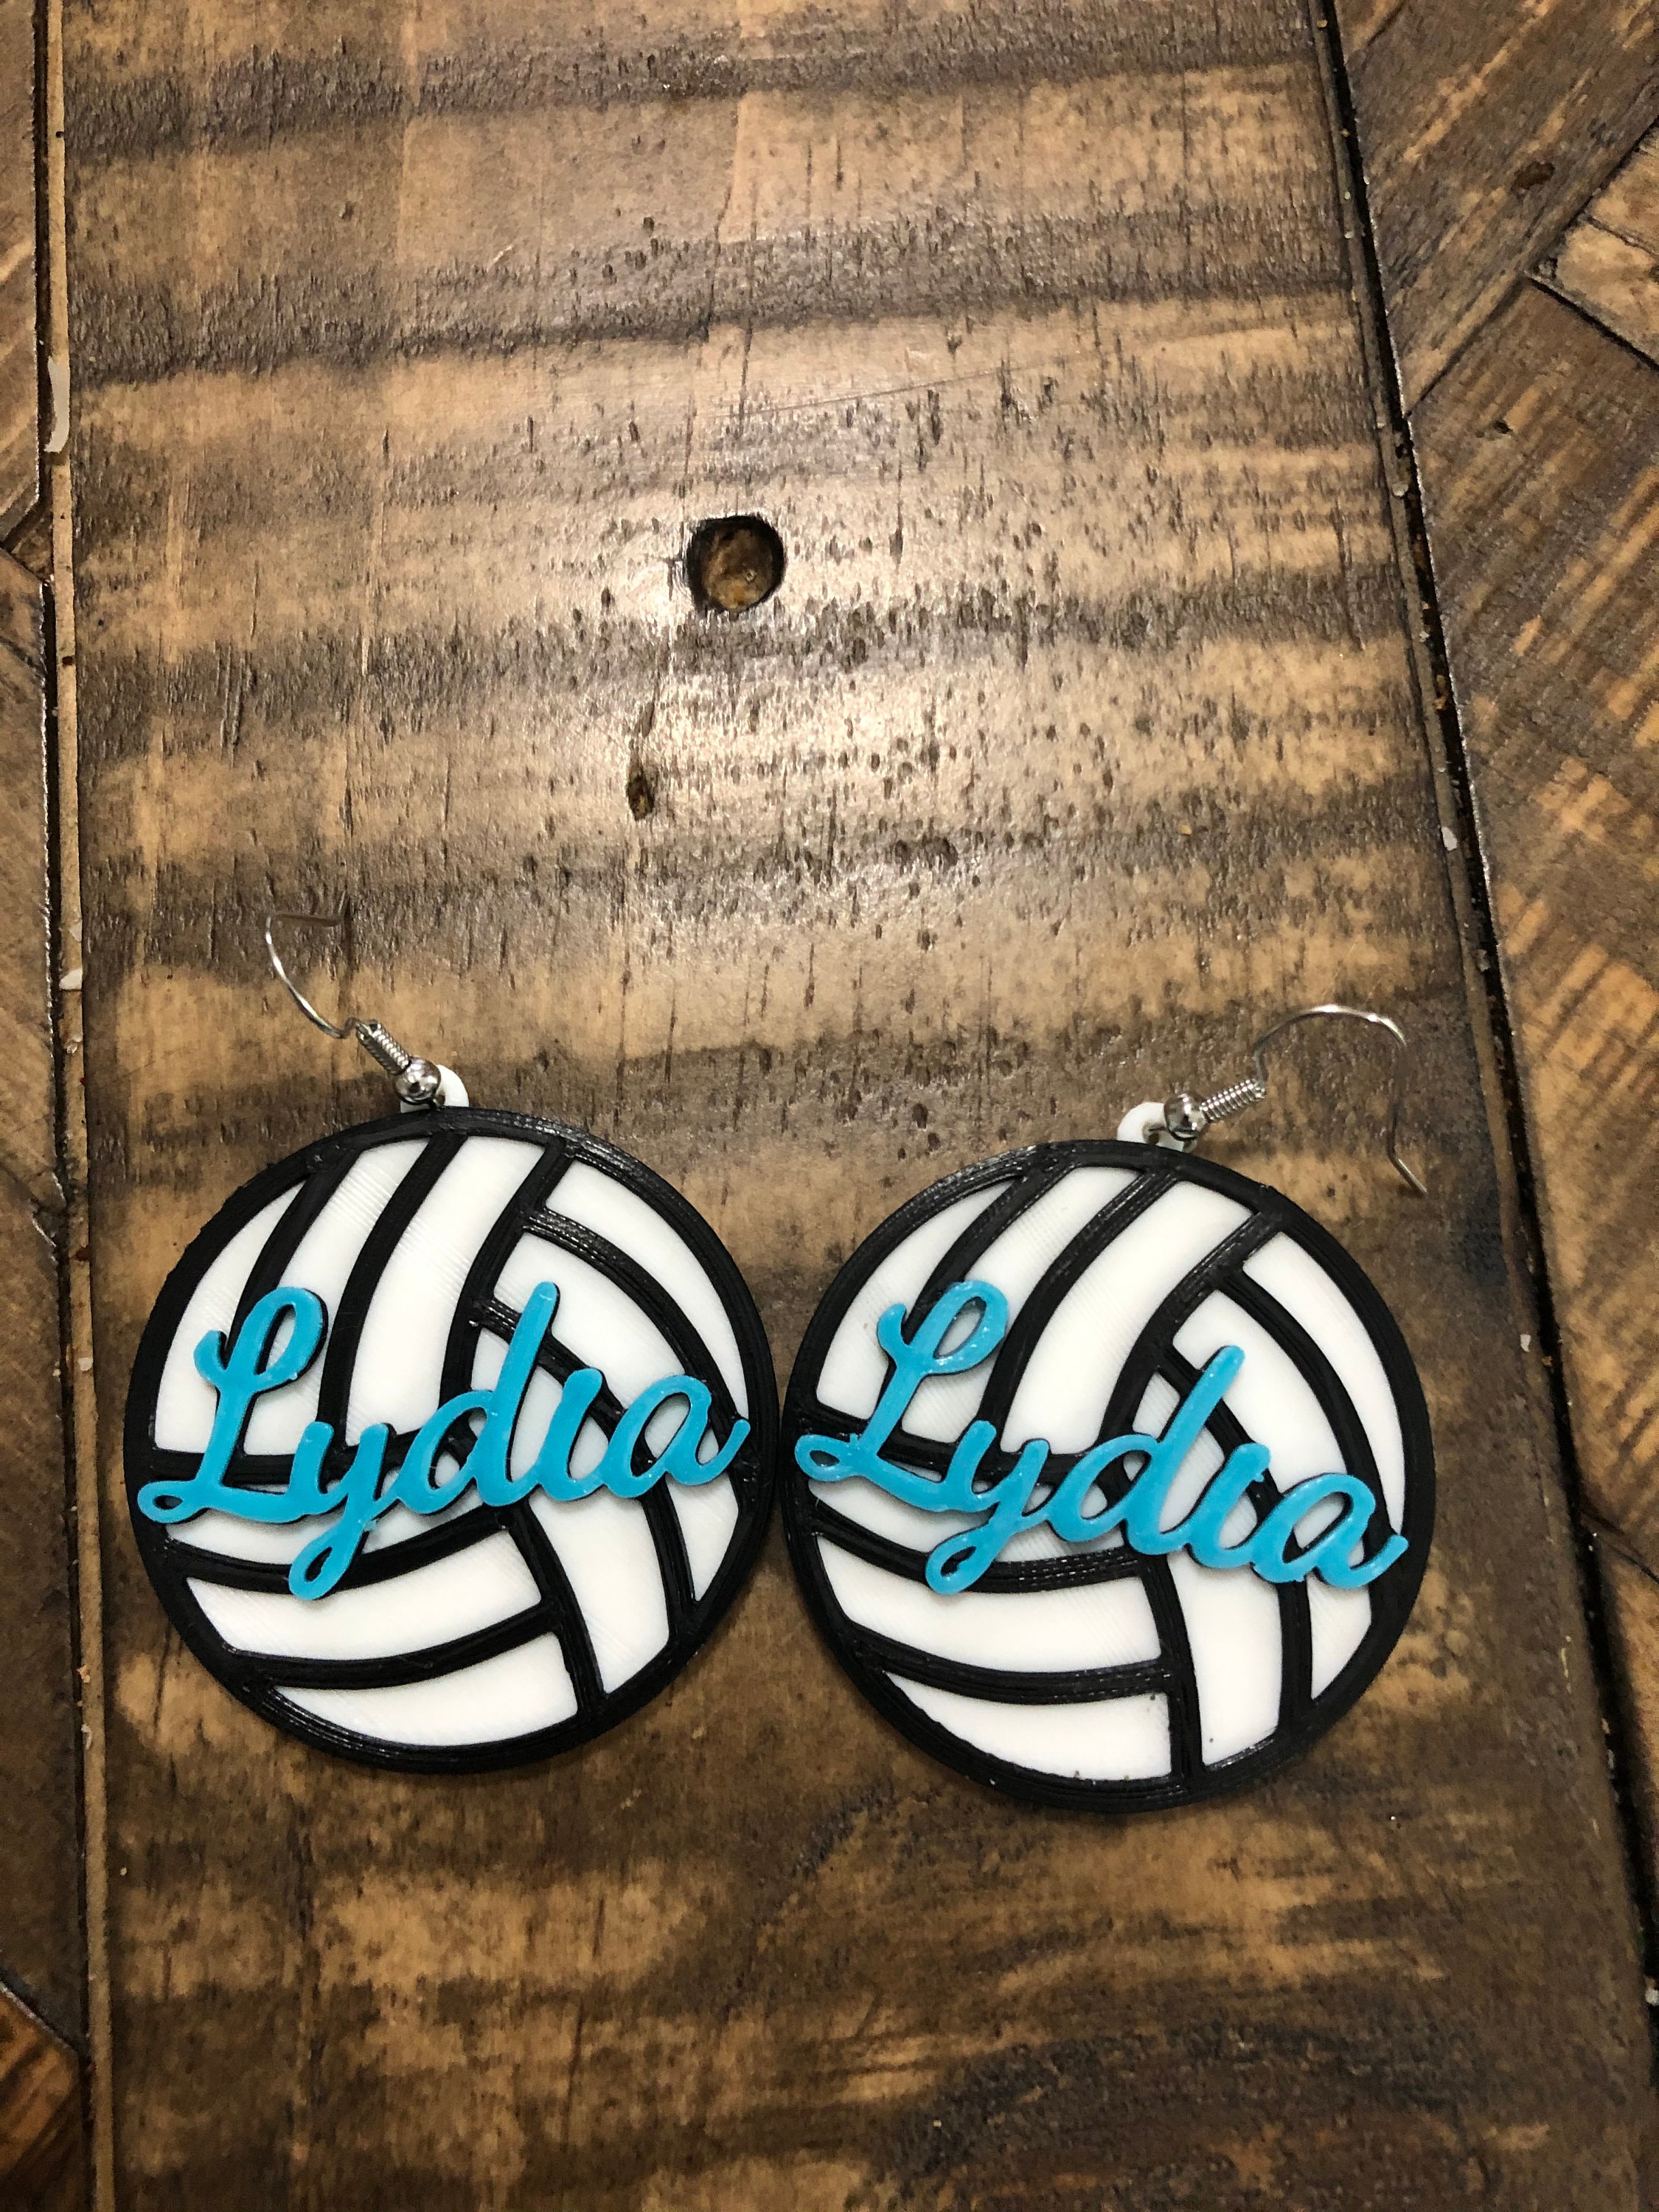 if Desired Add PlayerTeam Name and Number - Personalized 3D Printed Earrings Volleyball Earrings Solid background